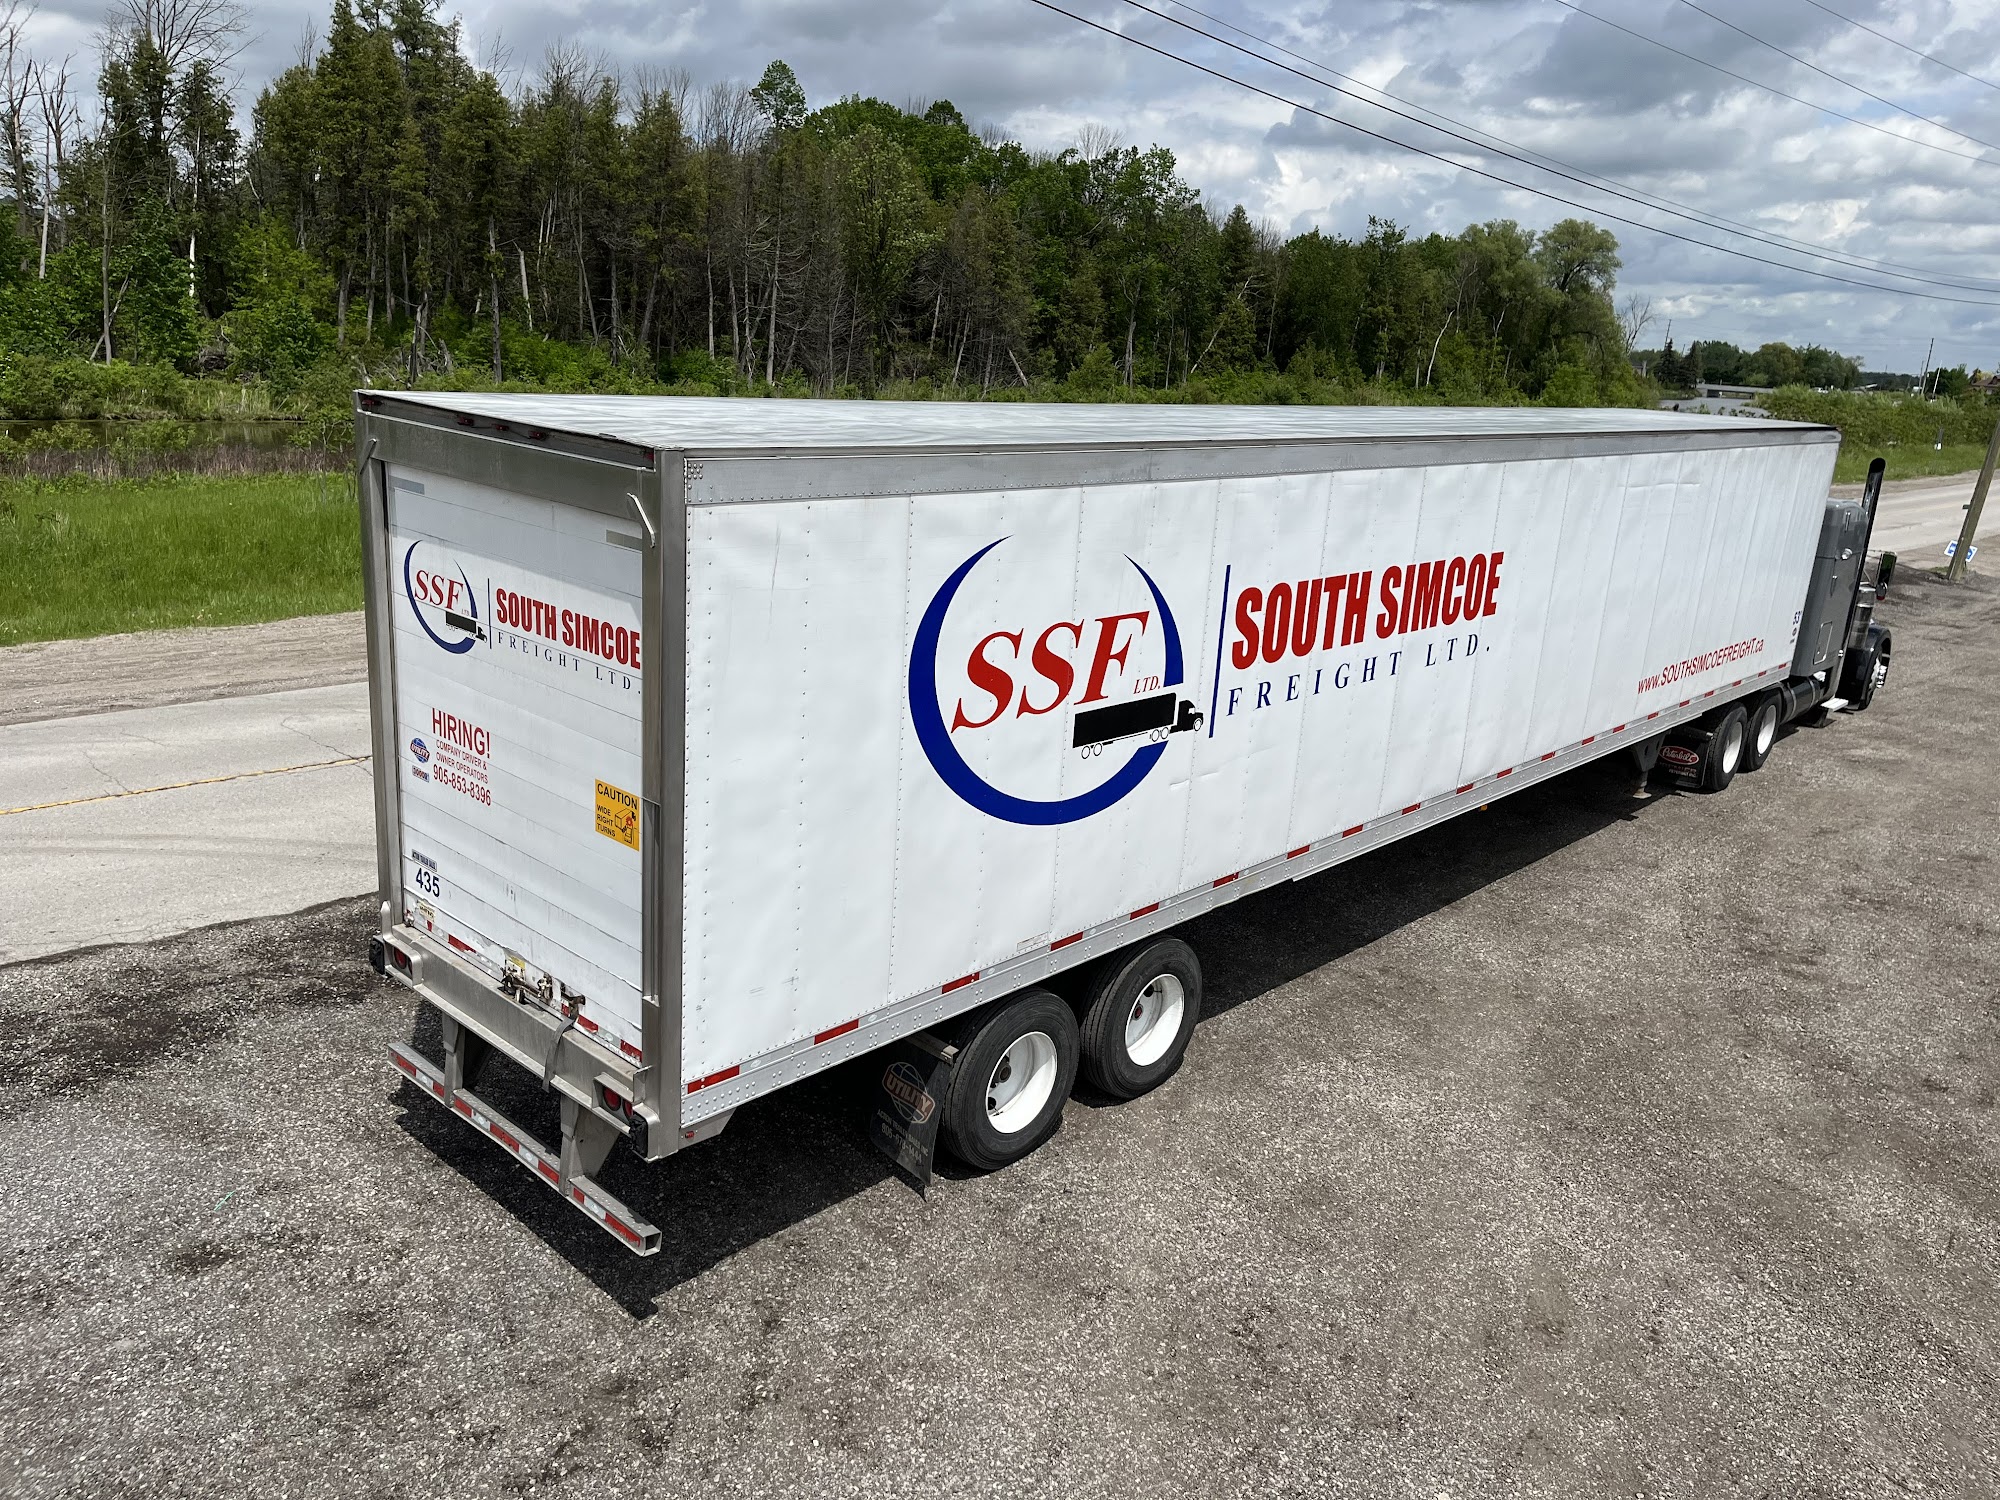 South Simcoe Freight